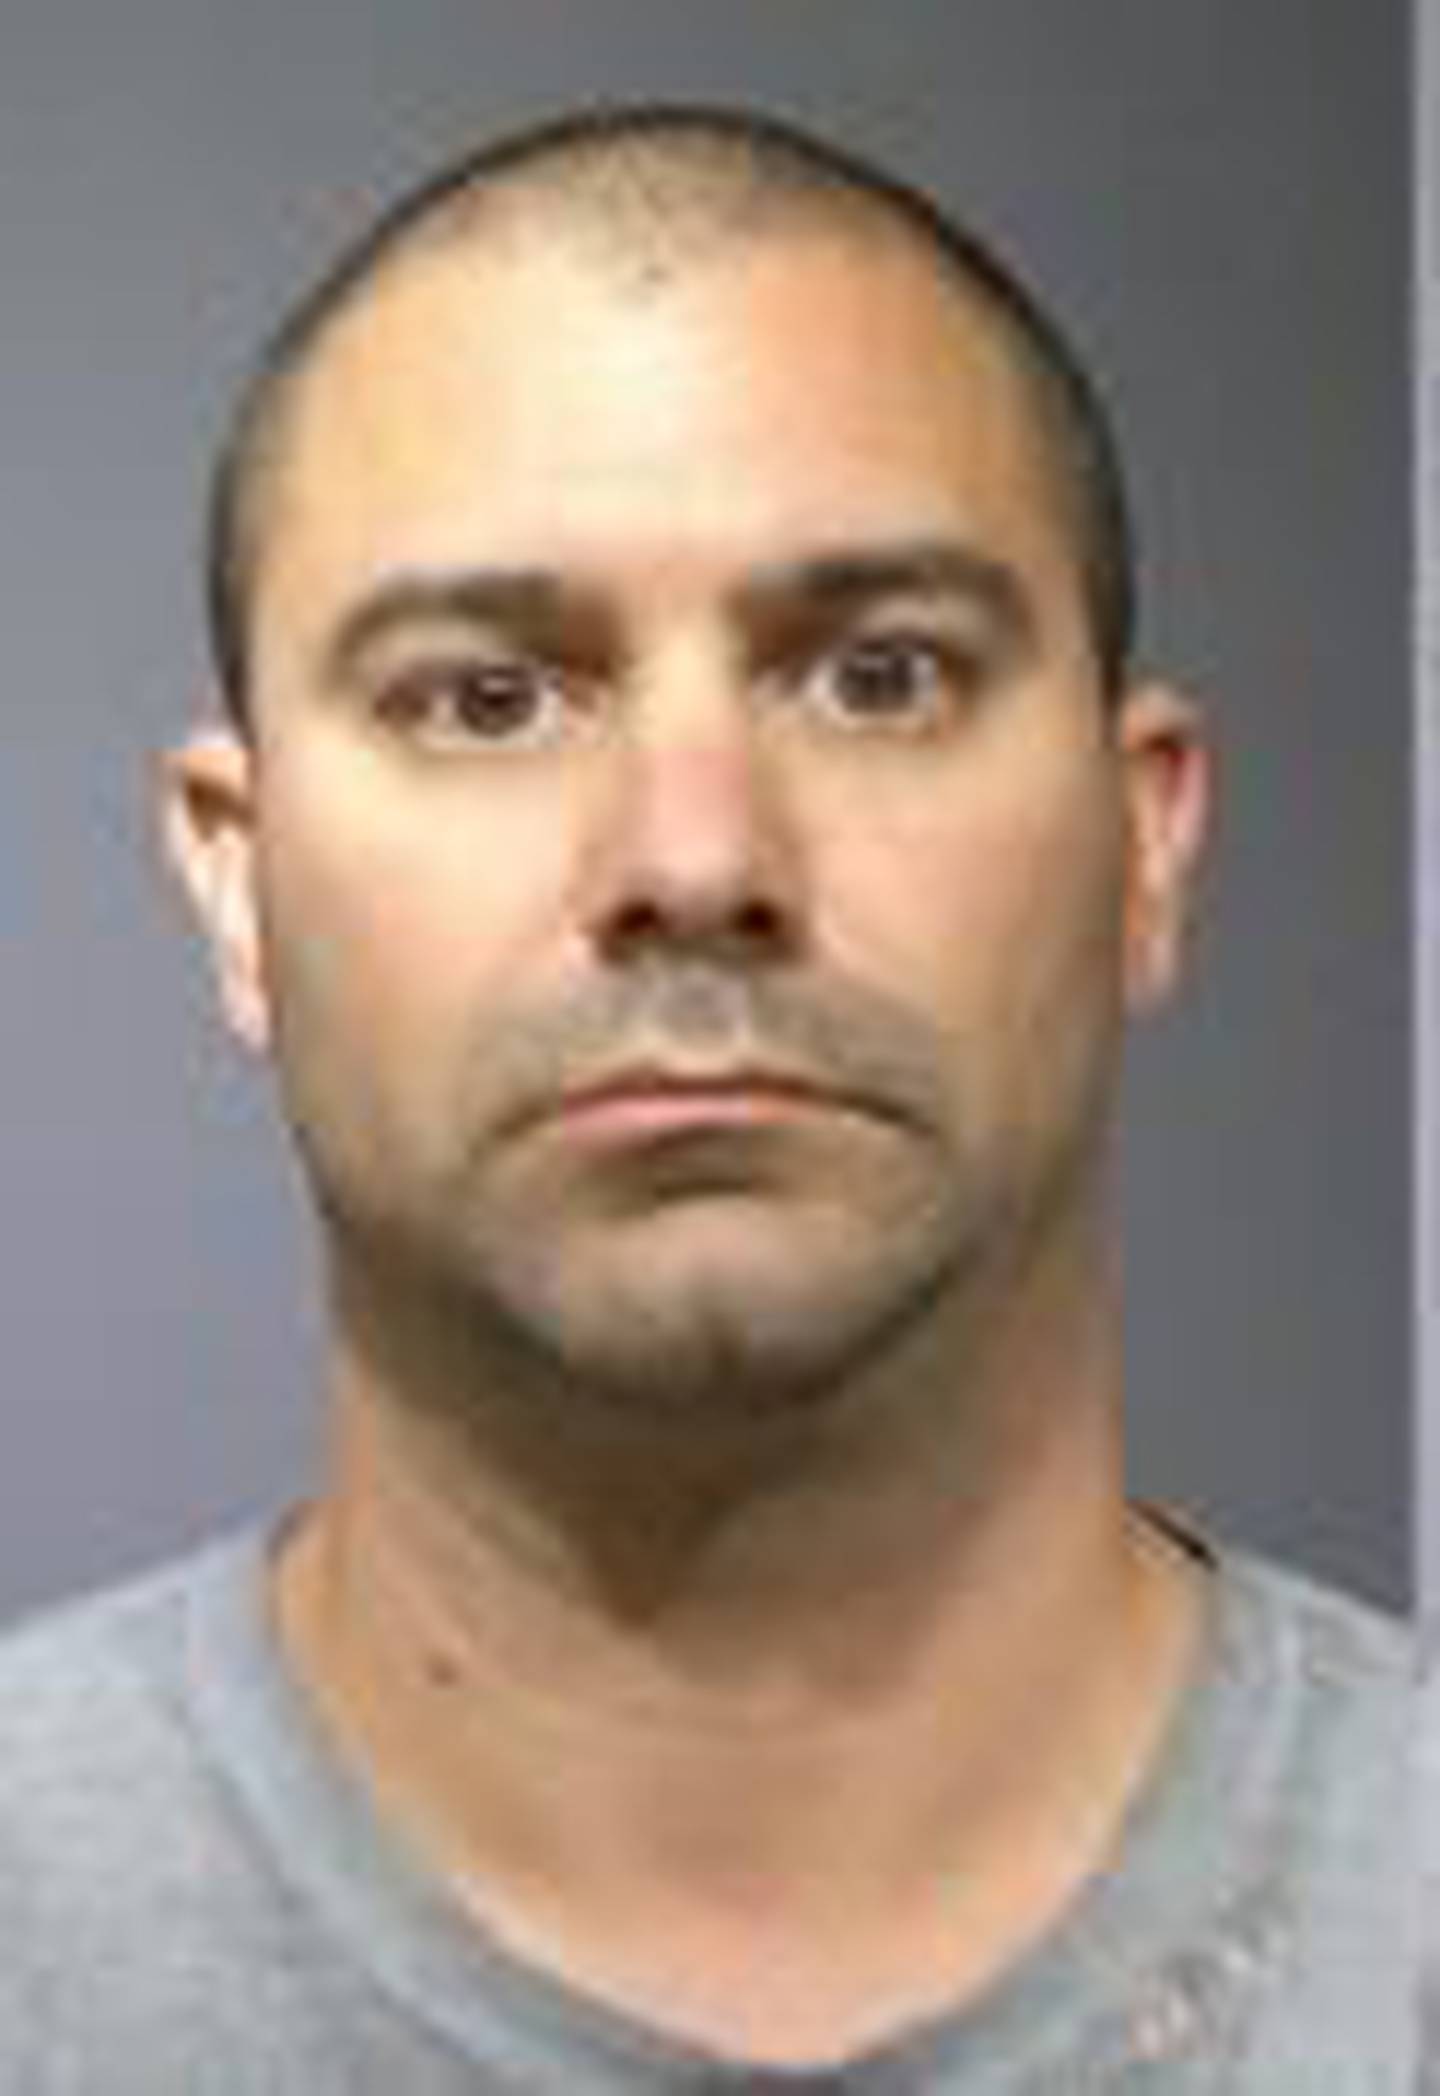 Salvo Campagna, 39, of Plano, has been charged with indecent solicitation of a child, traveling to meet a child and solicitation to meet a child.